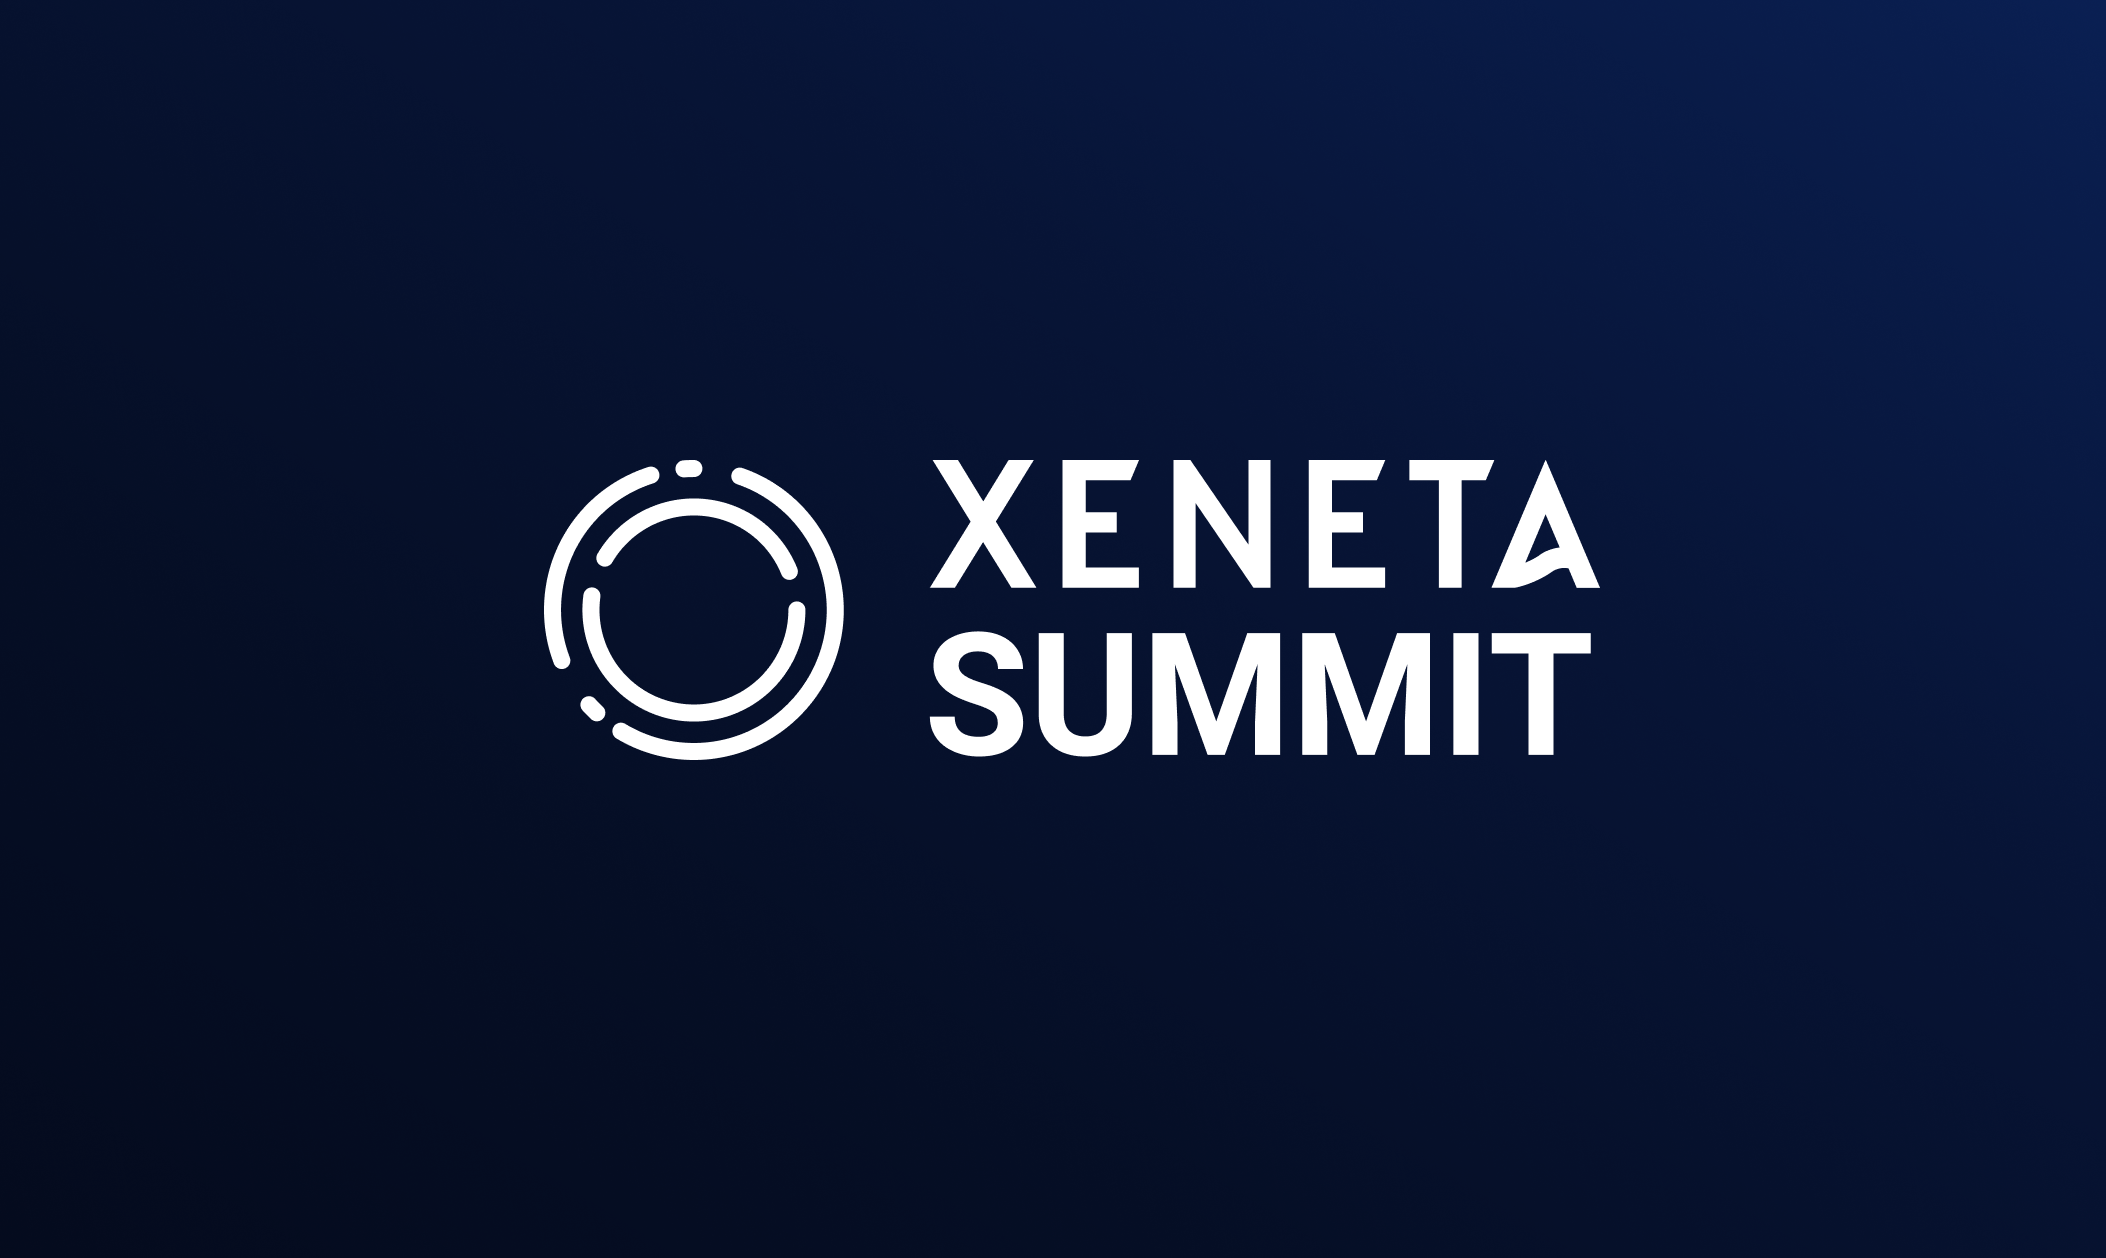 XENETA SUMMIT: OCEAN SHIPPING INDUSTRY MUST INVEST AND BUILD PARTNERSHIPS TO REDUCE CARBON EMISSIONS